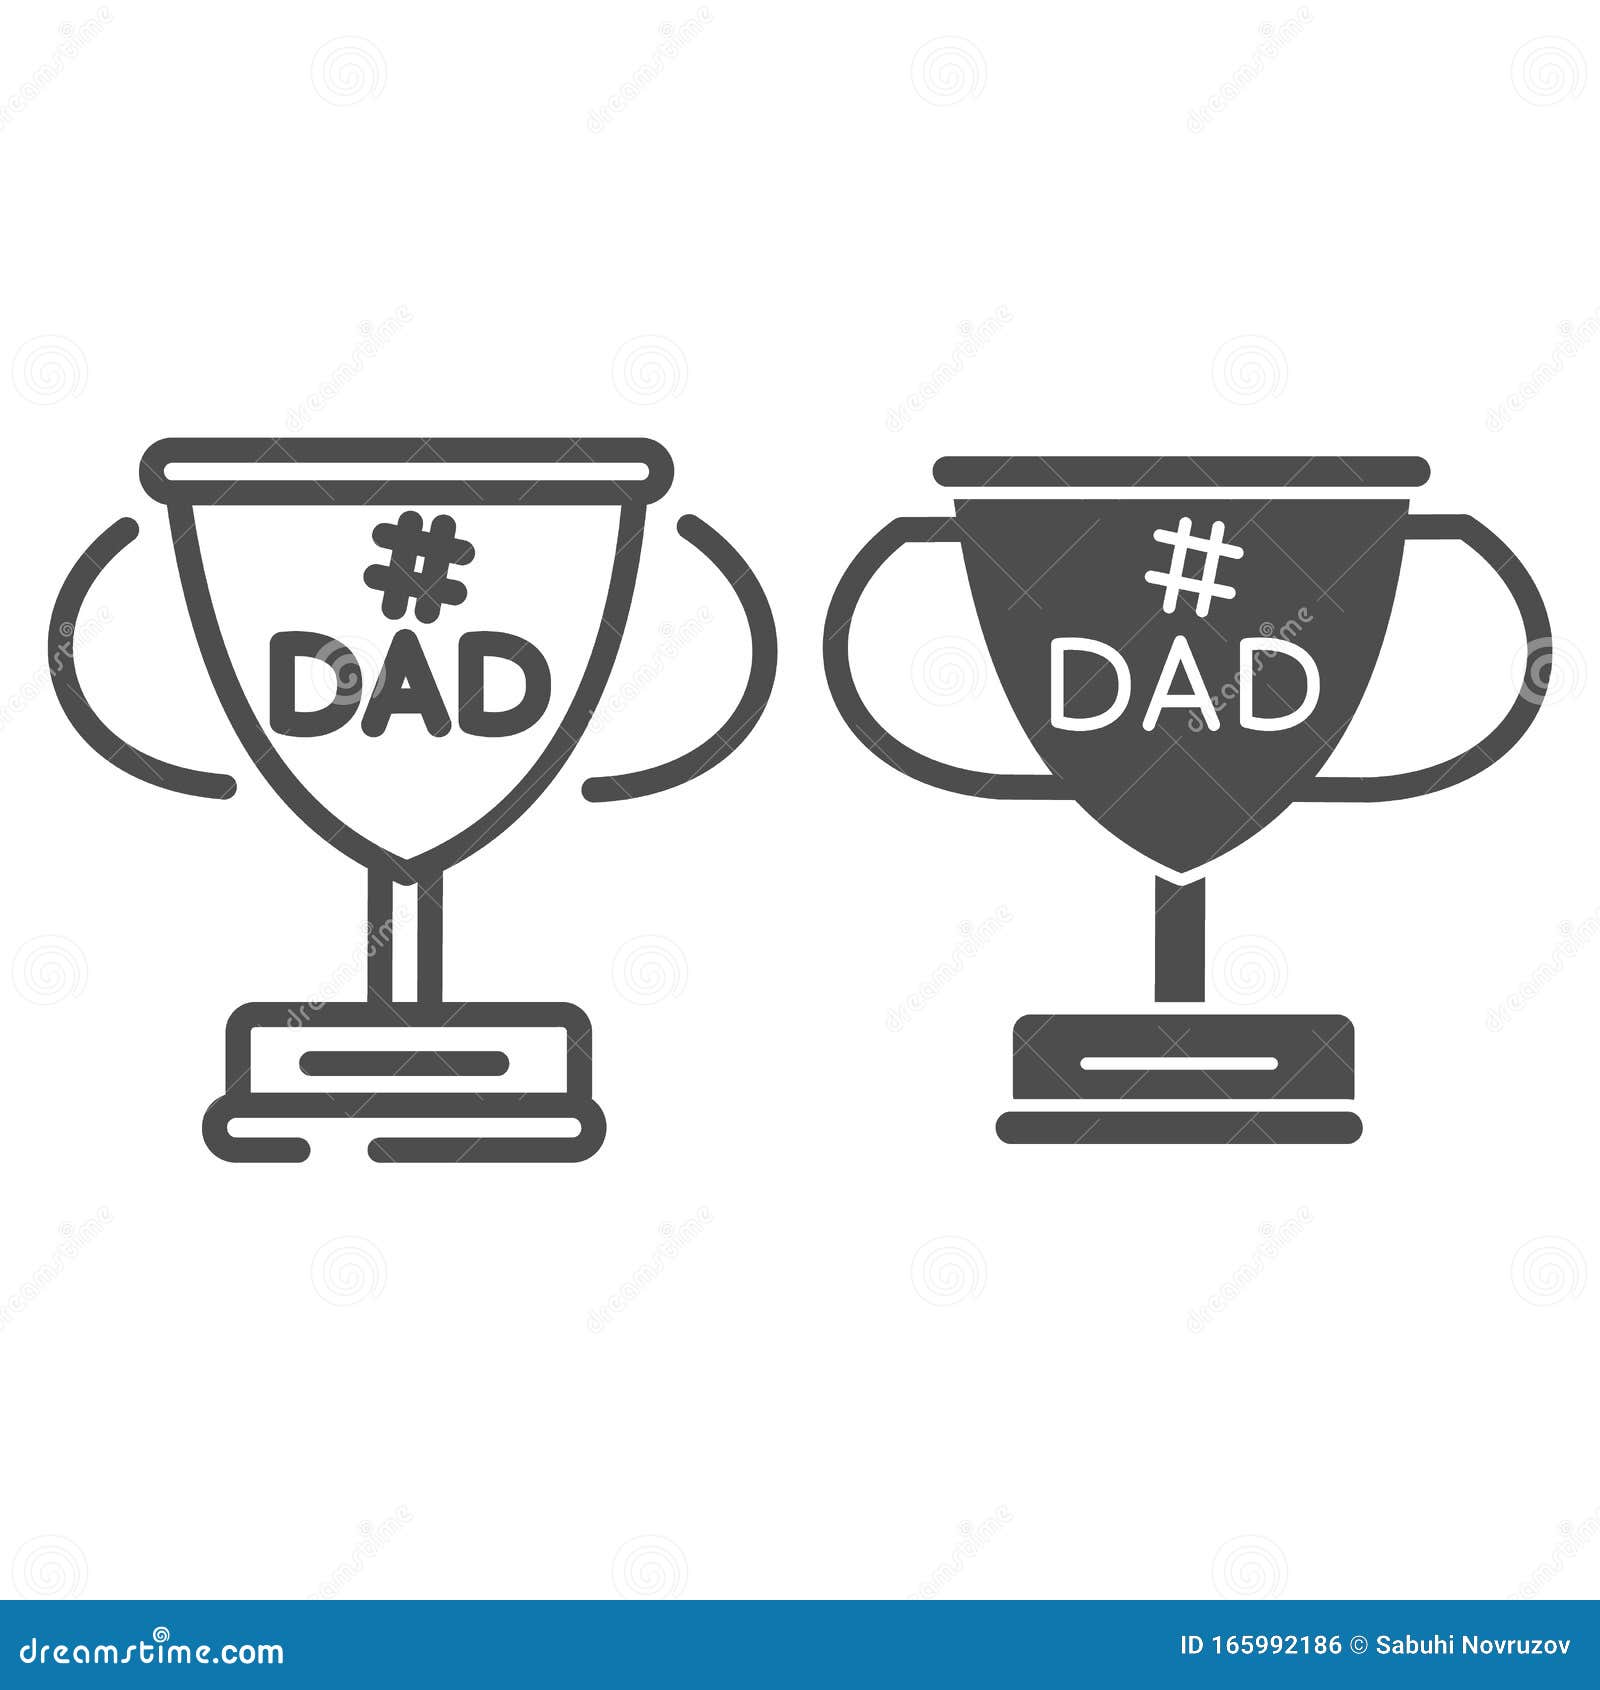 Father's Day Cup Svg - 876+ Amazing SVG File - Free SGV Link